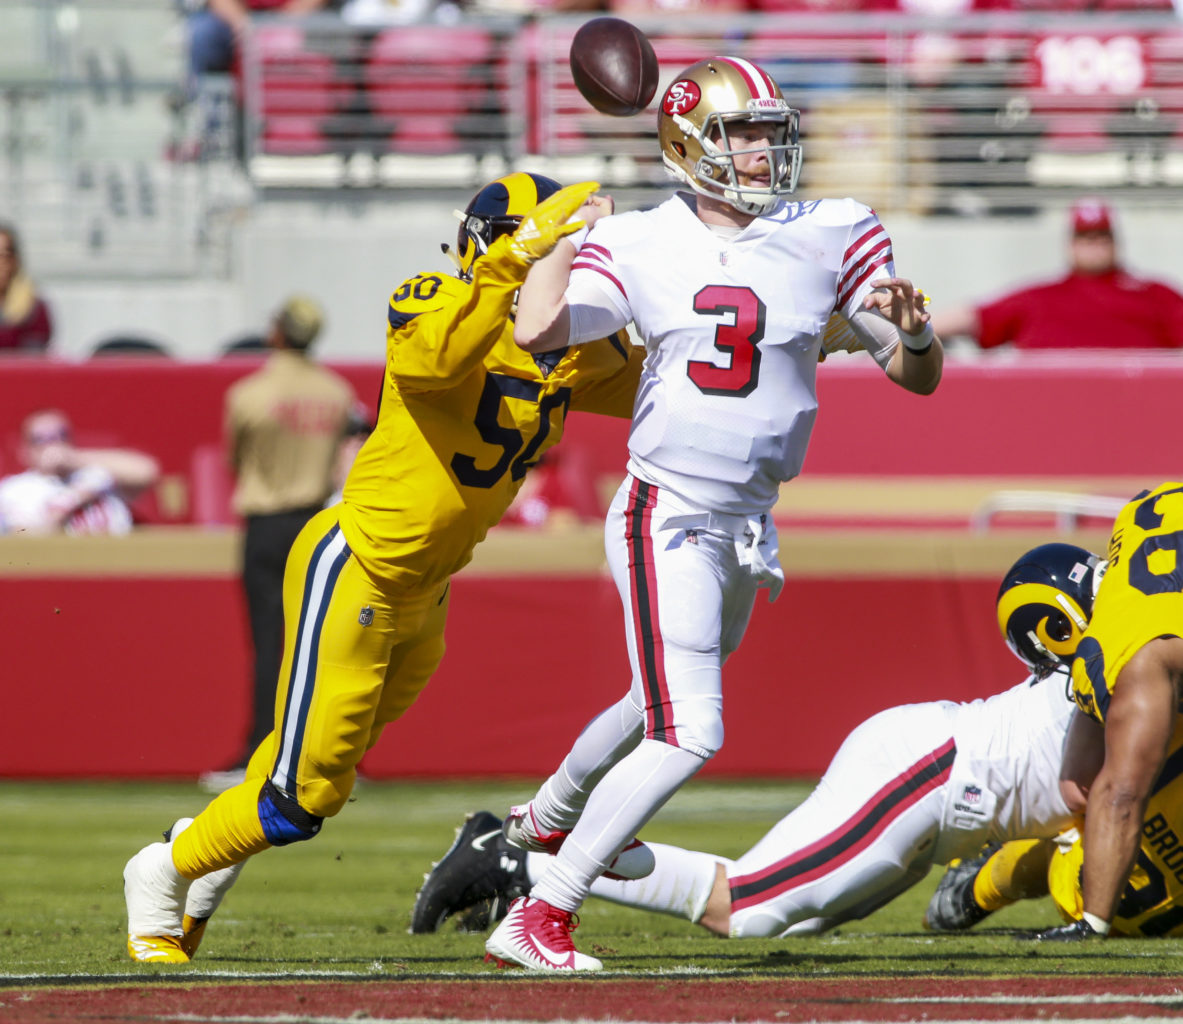 The  #49ers wore these throwbacks only once in 2018, a home game against the  #LARams. The game was originally scheduled for  #SNF but because of SF's abysmal record at the time (1-5), the game got flexed to a day game. The Niners would lose 39-10.Continue thread.